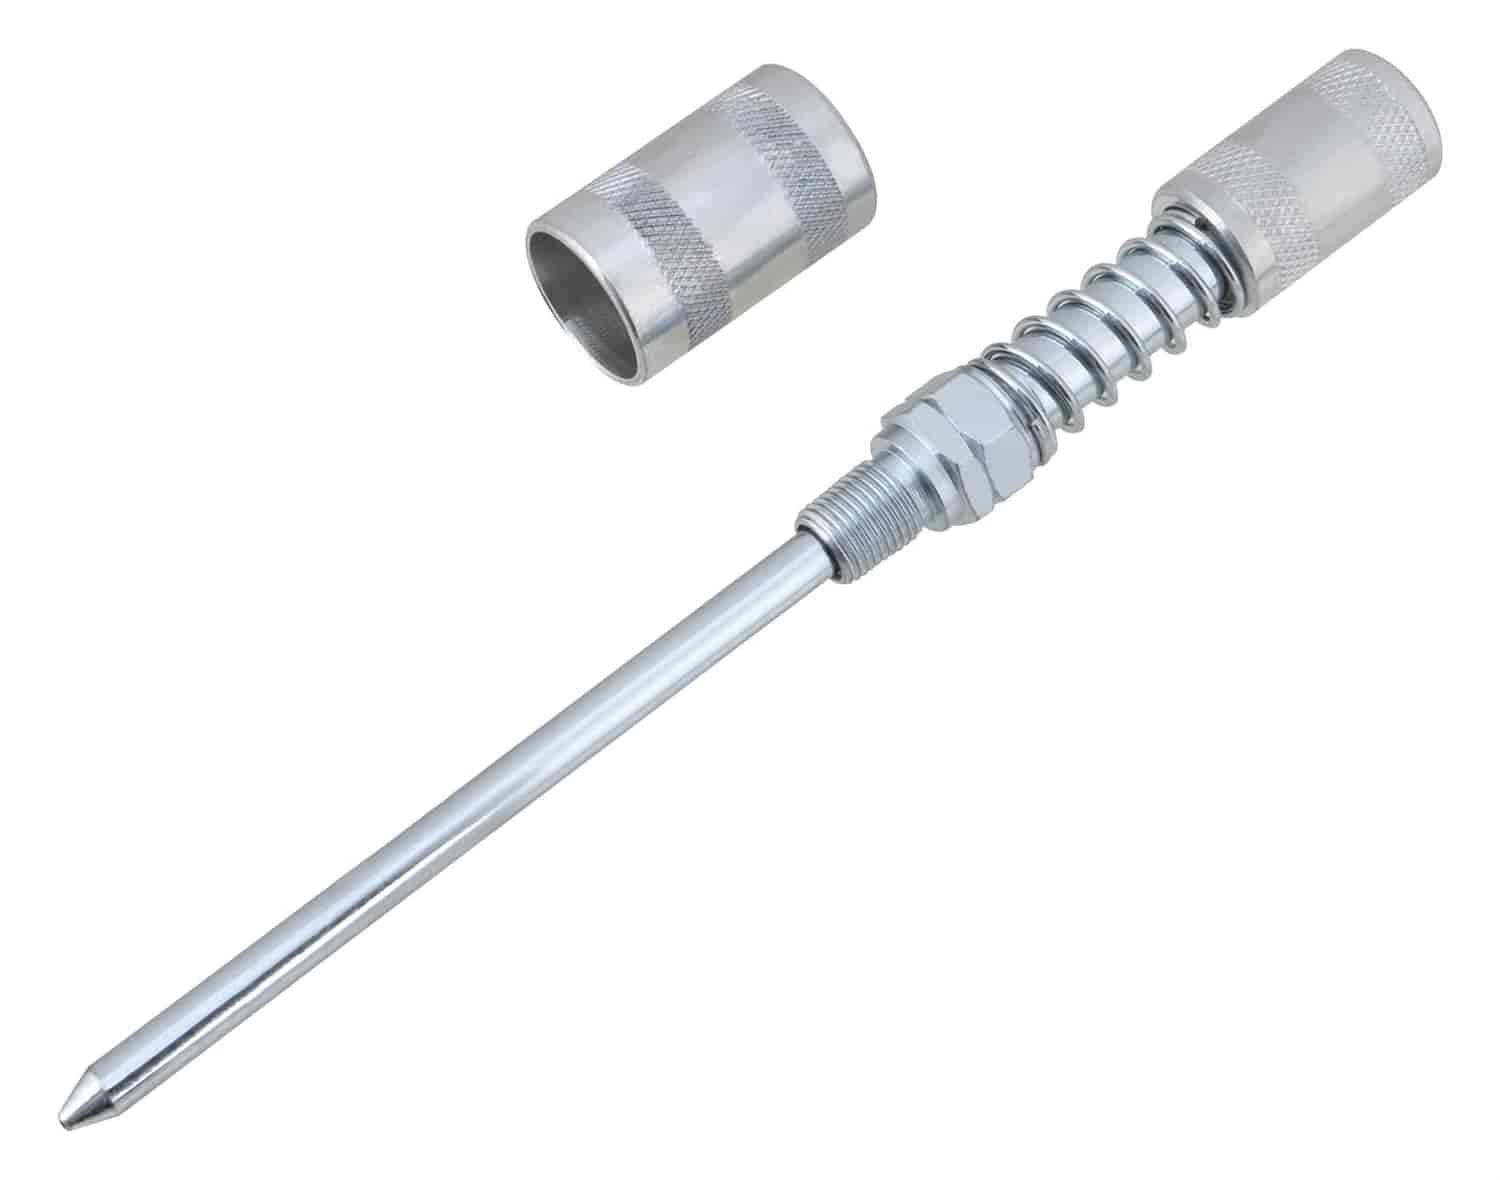 4 in. Grease Gun Needle Nose Adapter